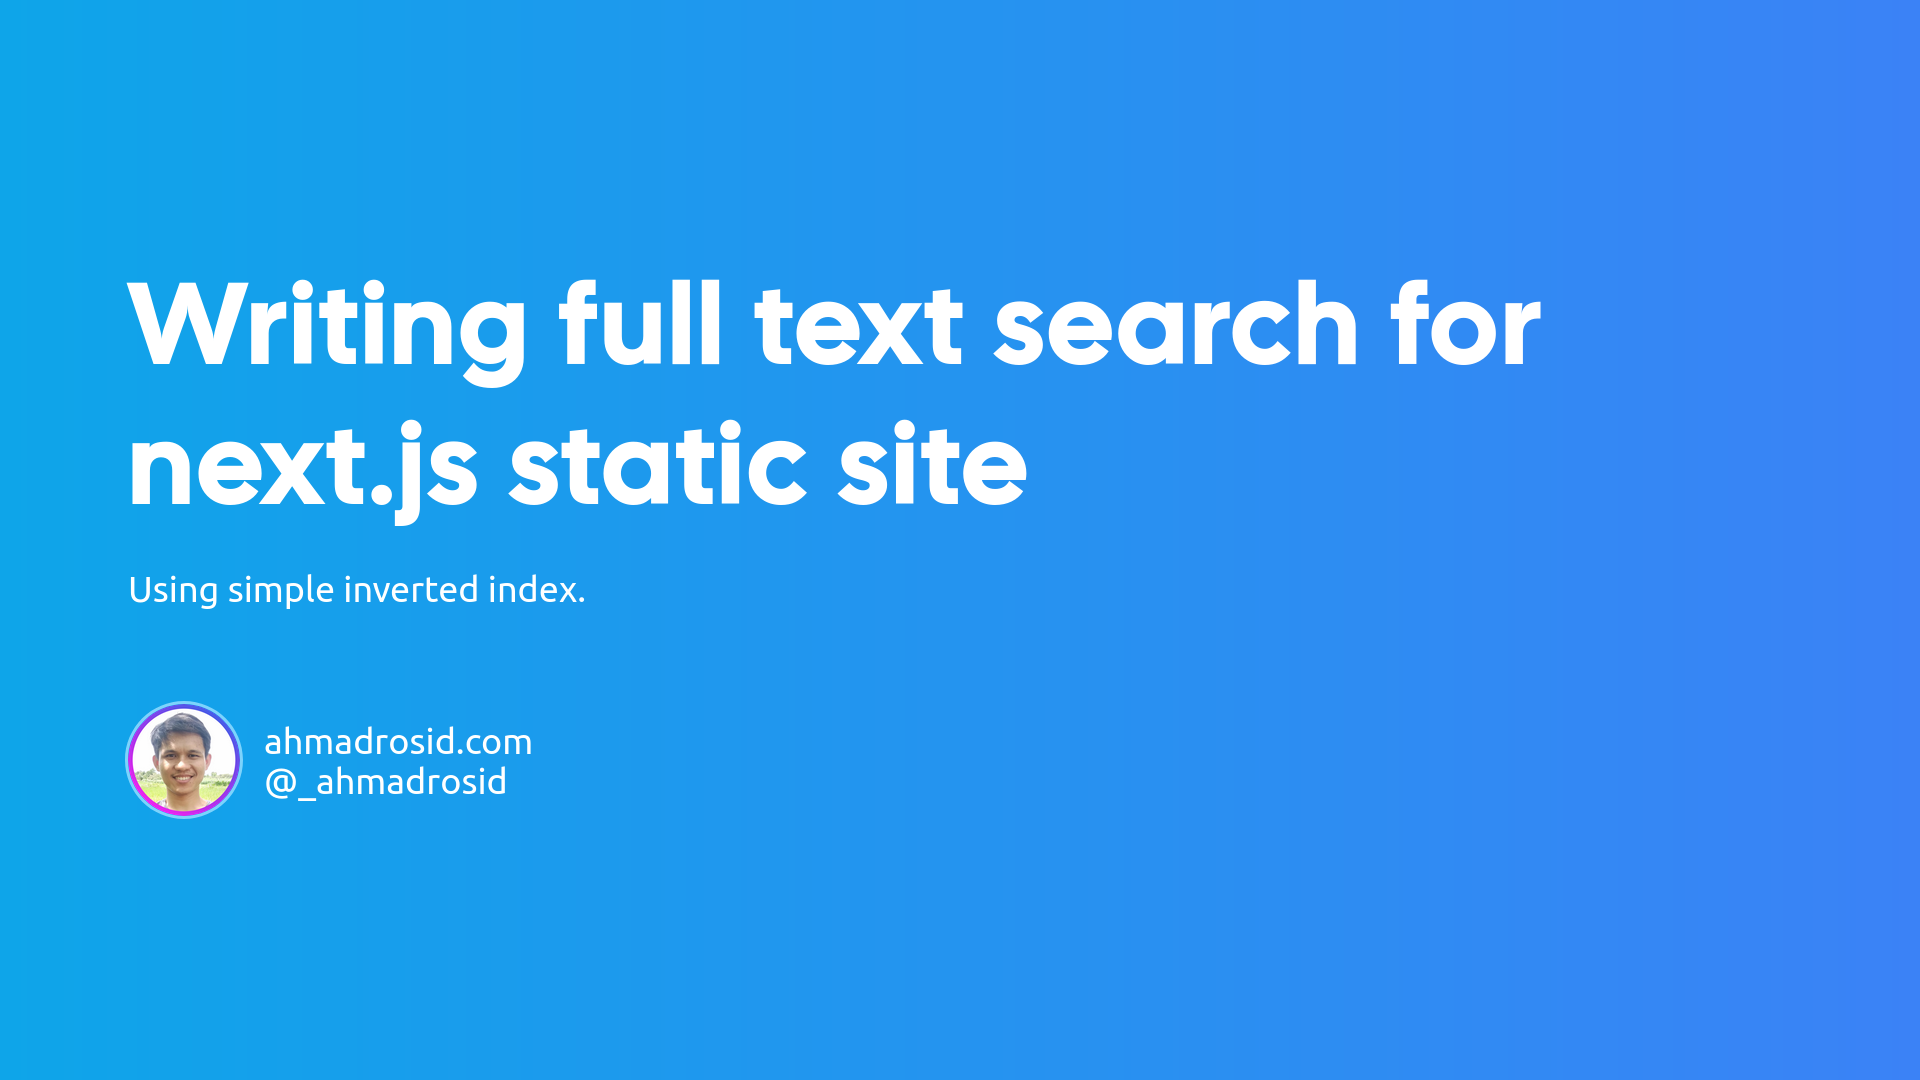 Writing full text search in Javascript for Next.js static site